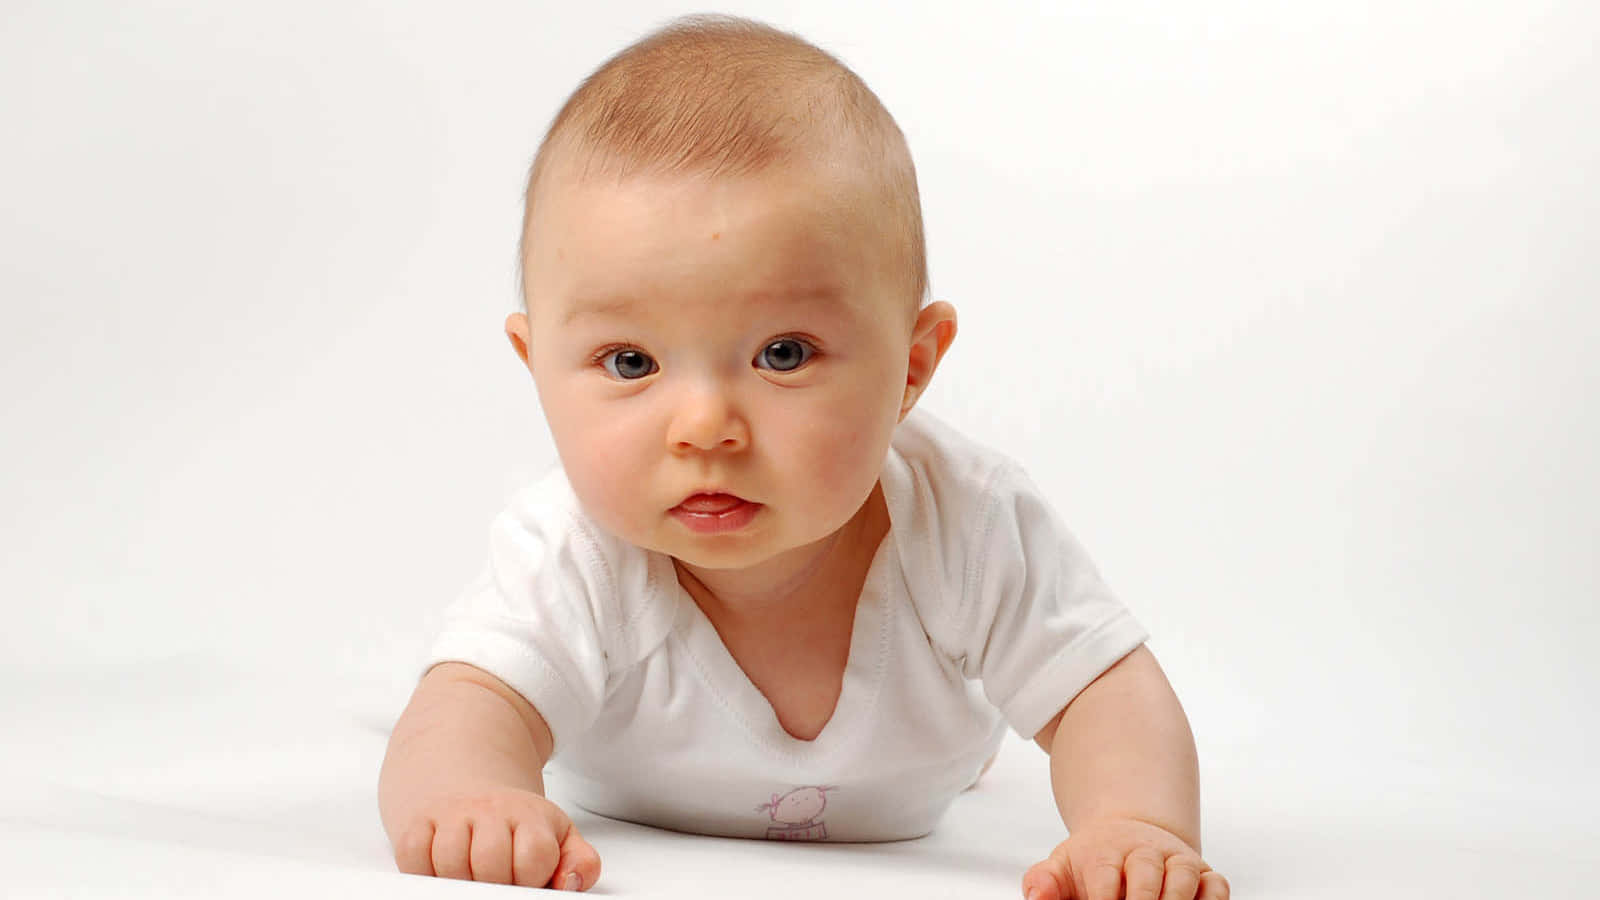 A Baby Is Laying On A White Background